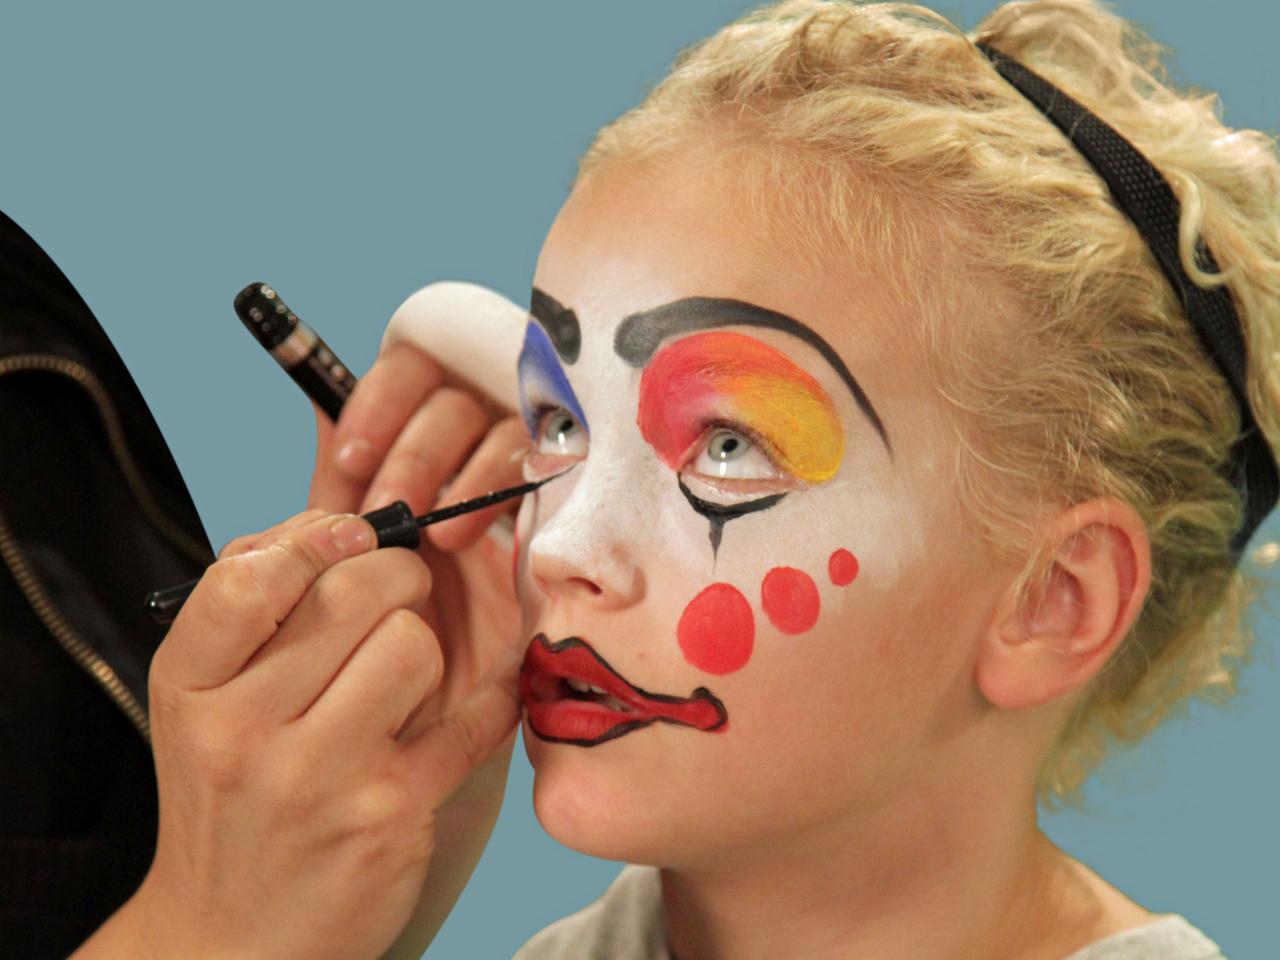 What are some classic clown makeup styles?